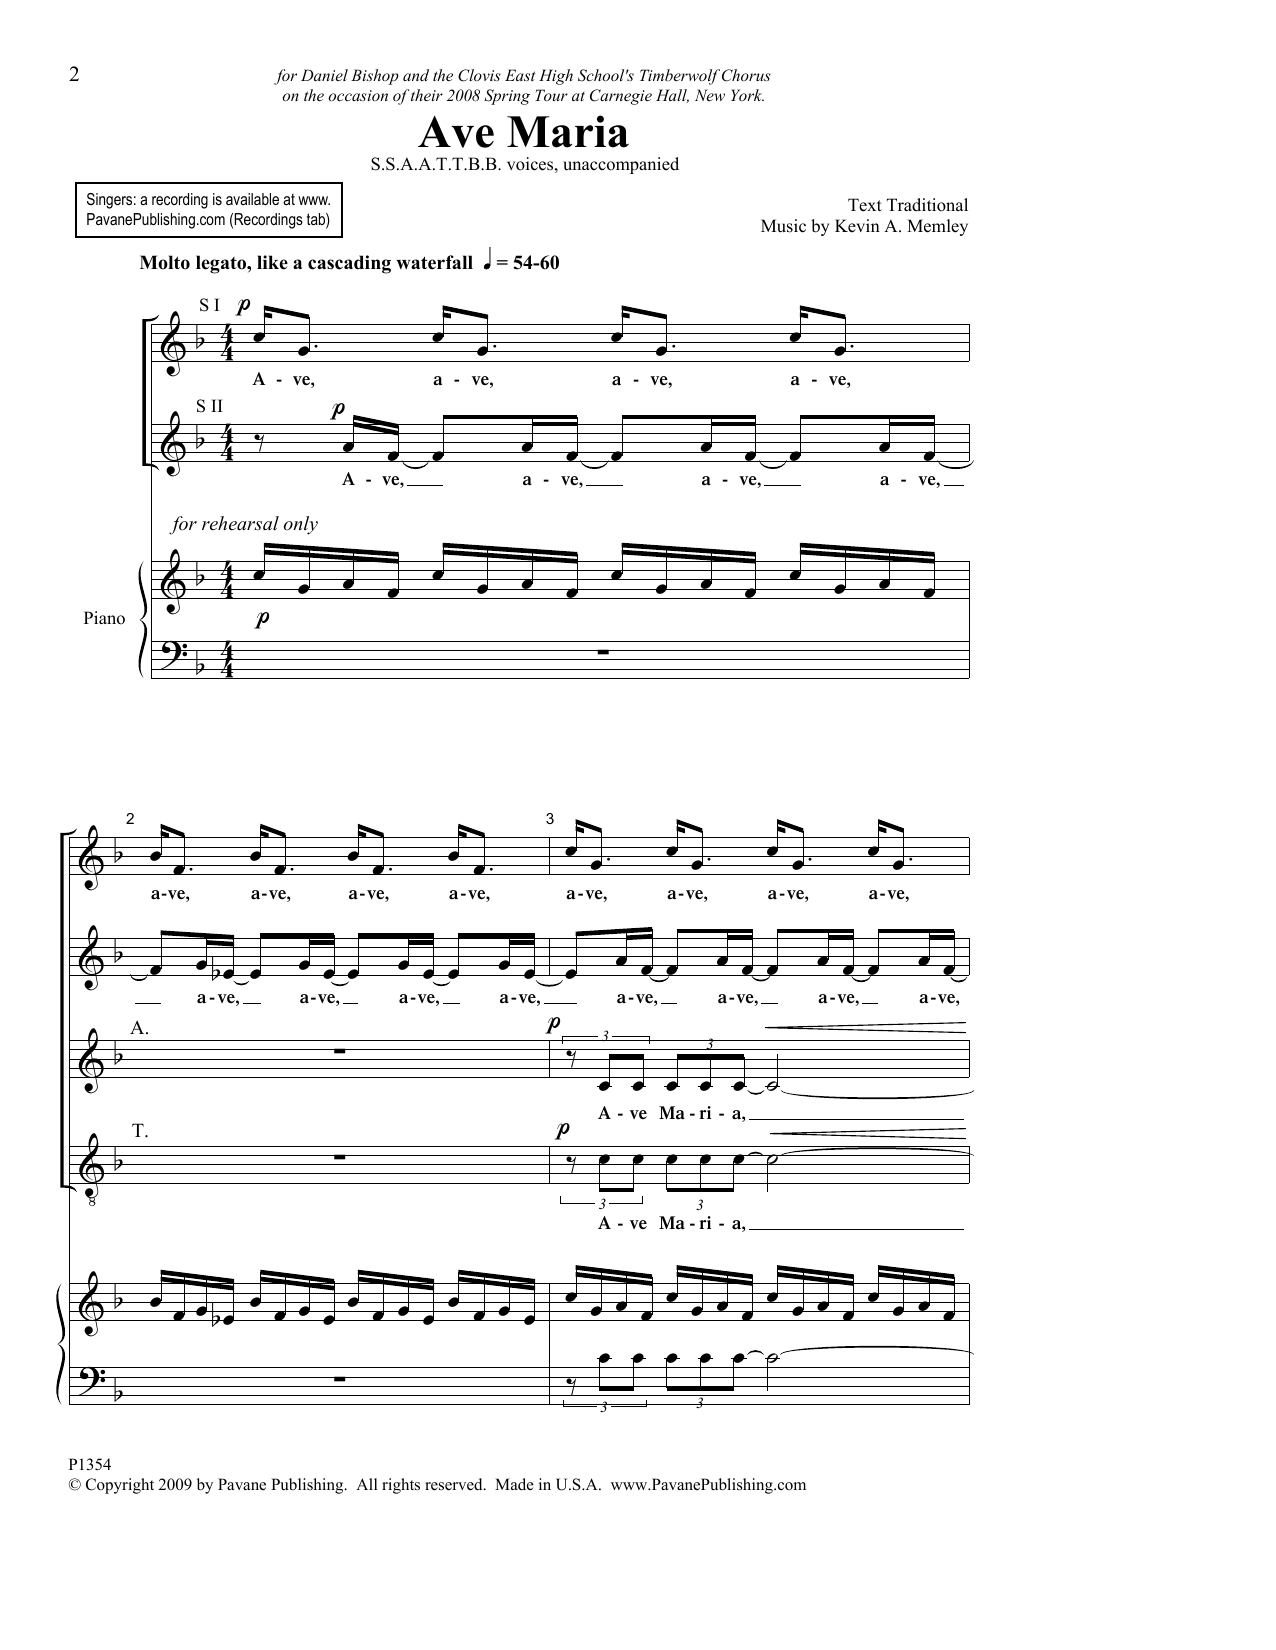 Download Kevin A. Memley Ave Maria Sheet Music